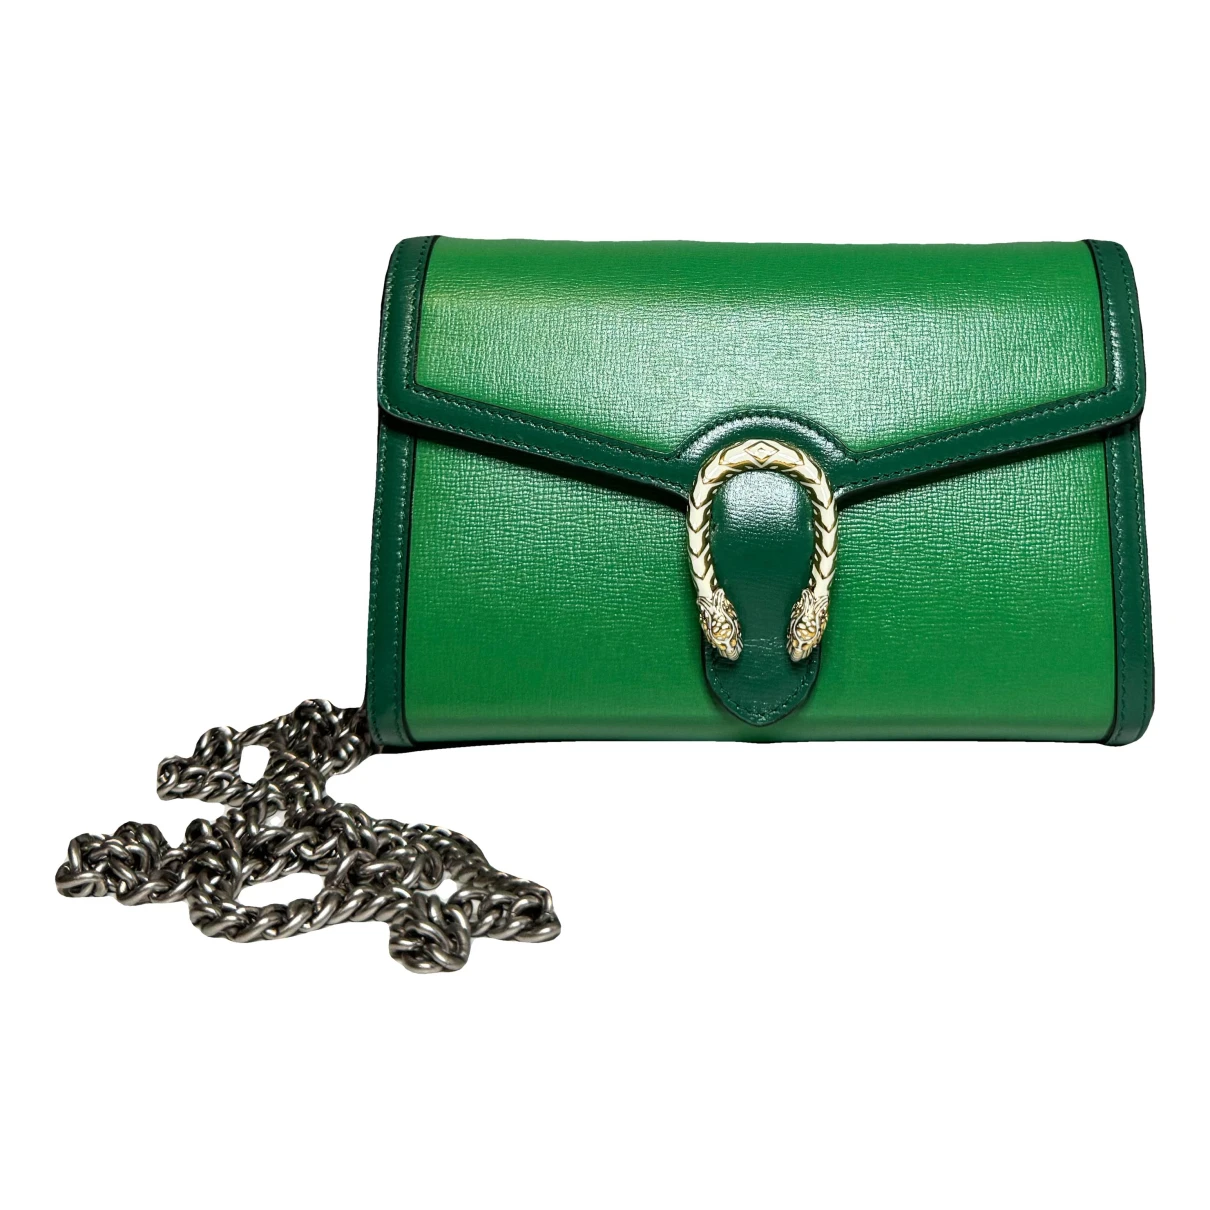 Pre-owned Gucci Dionysus Leather Handbag In Green